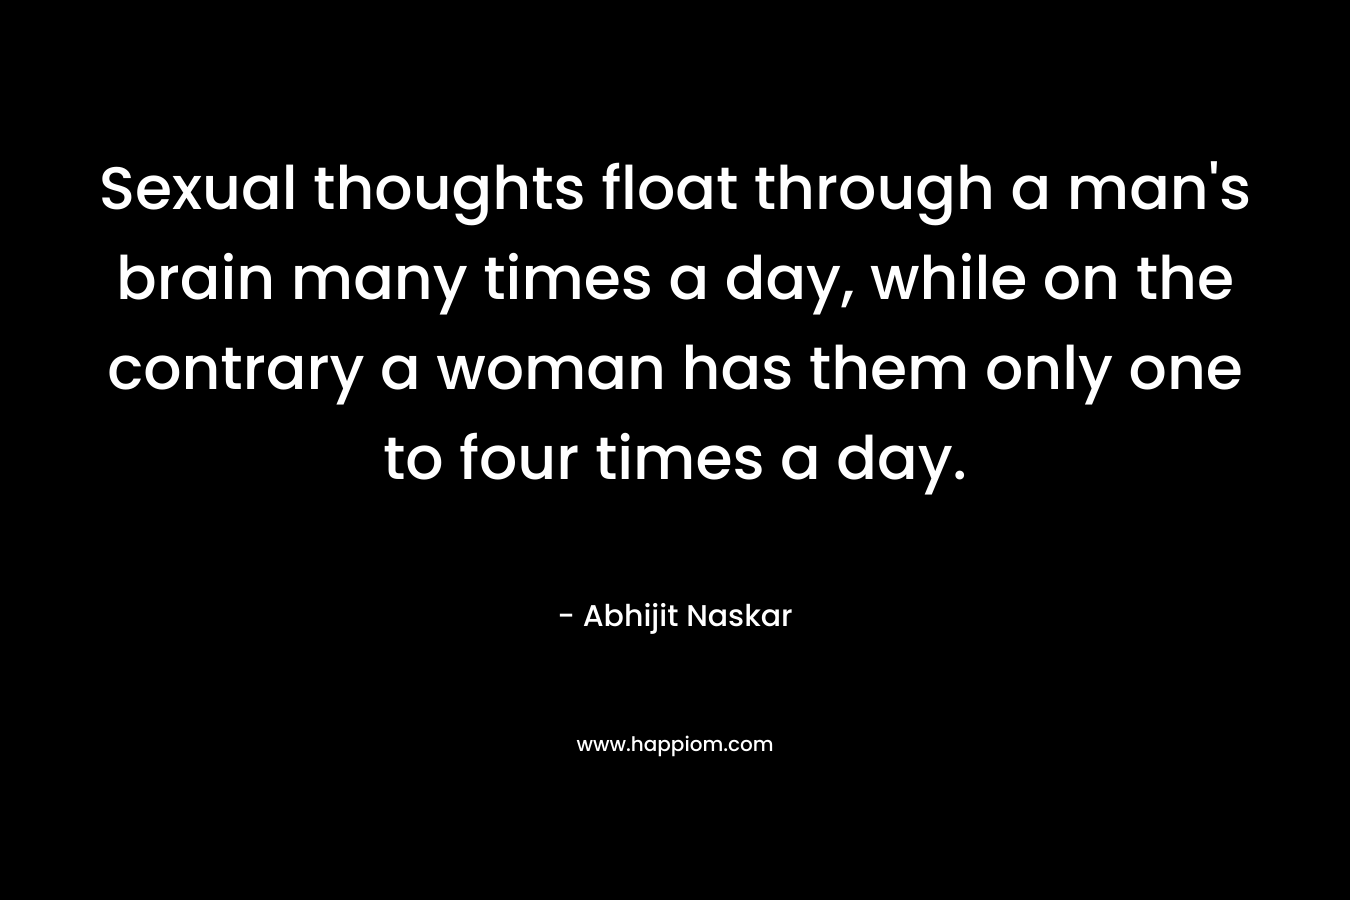 Sexual thoughts float through a man’s brain many times a day, while on the contrary a woman has them only one to four times a day. – Abhijit Naskar